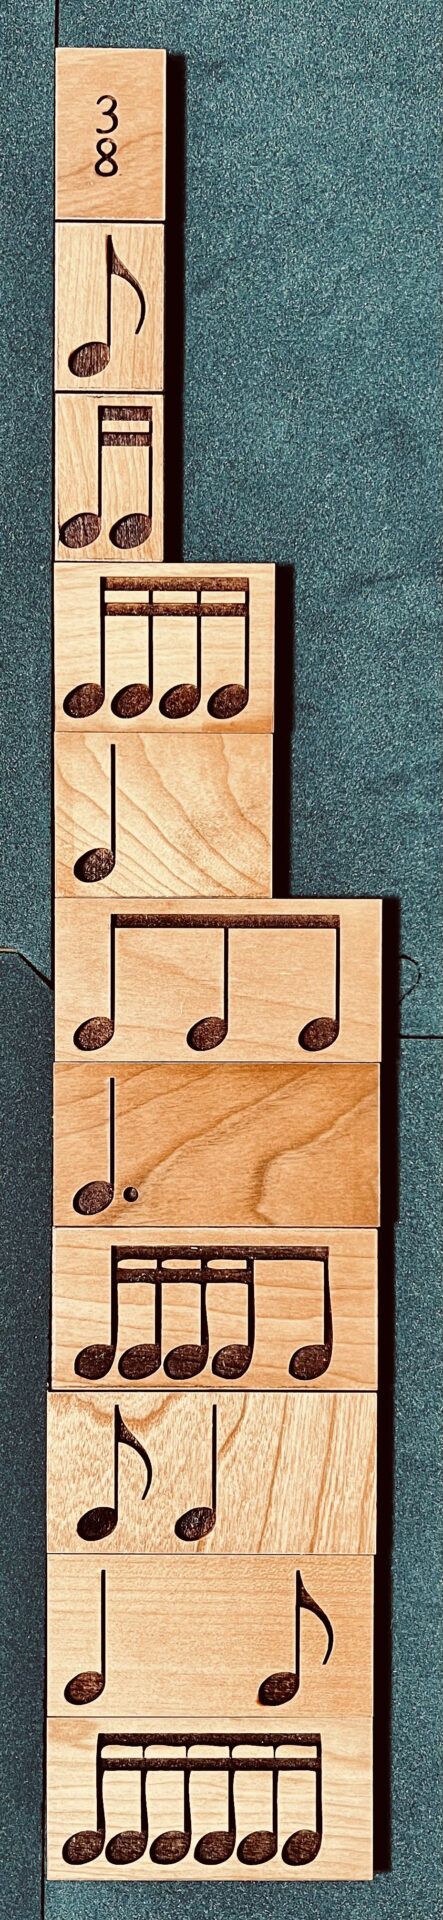 Musical notes on wooden blocks